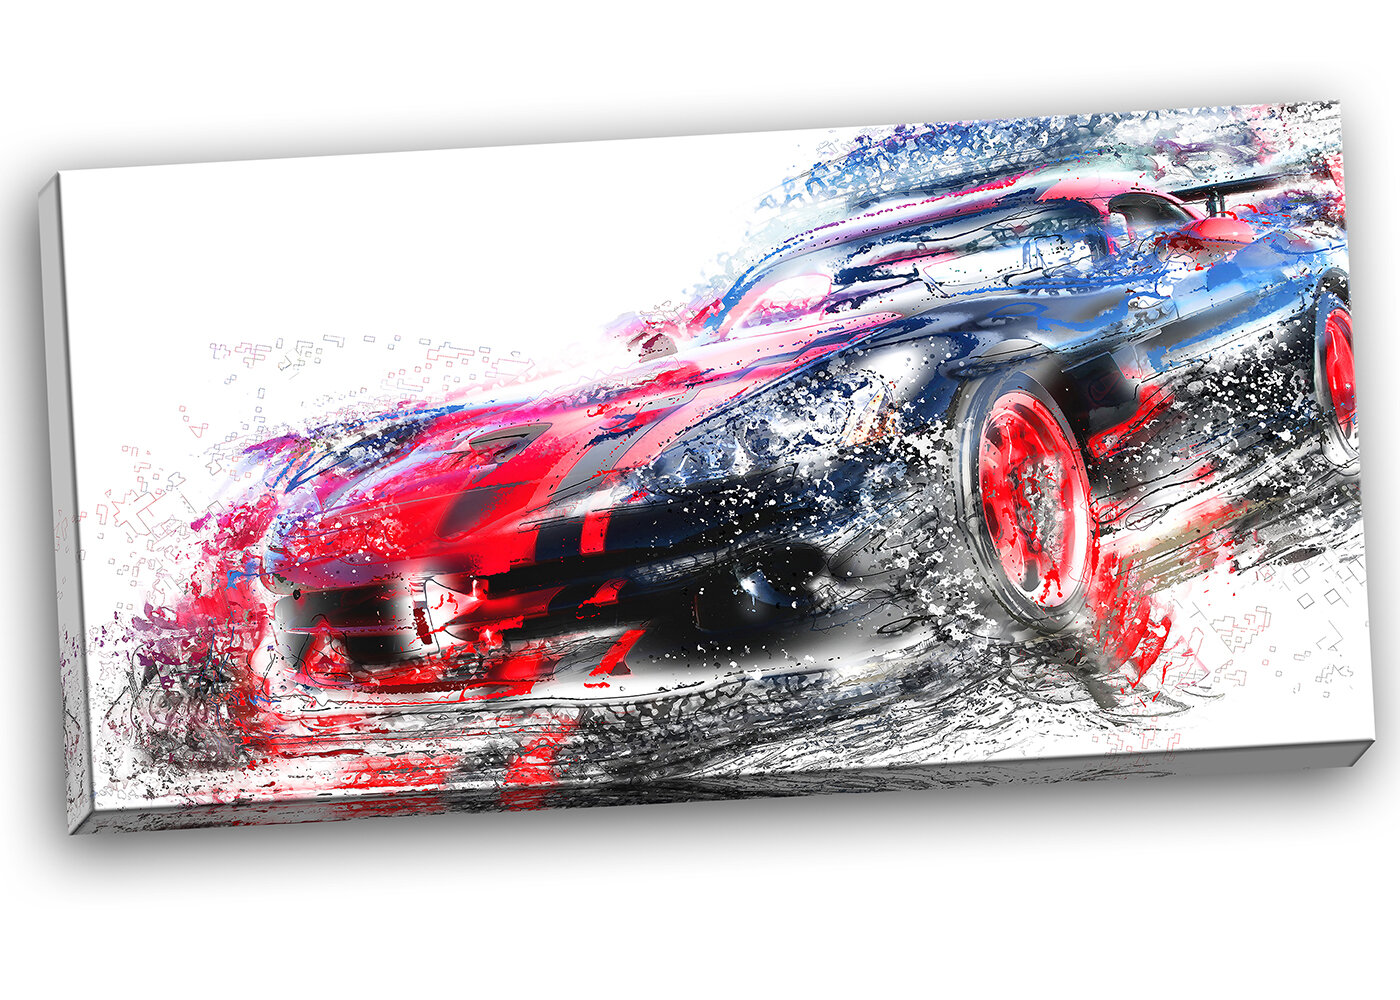 Ebern Designs Red And Black Sports Car On Canvas Print  Reviews Wayfair